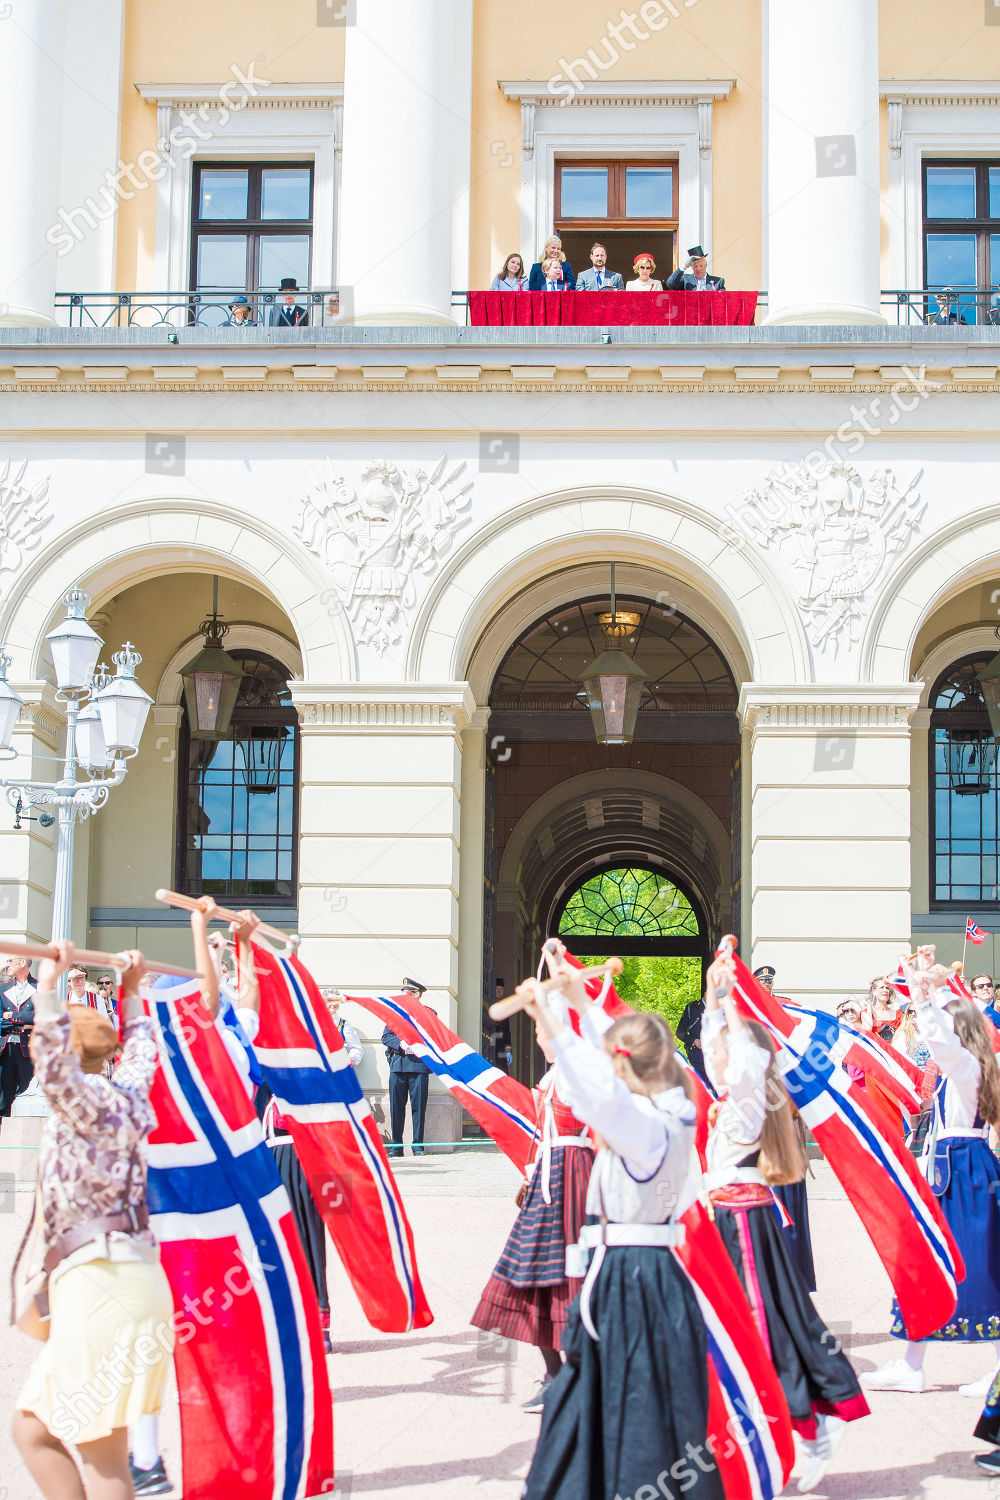 national-day-celebrations-the-royal-palace-oslo-norway-shutterstock-editorial-10239768k.jpg